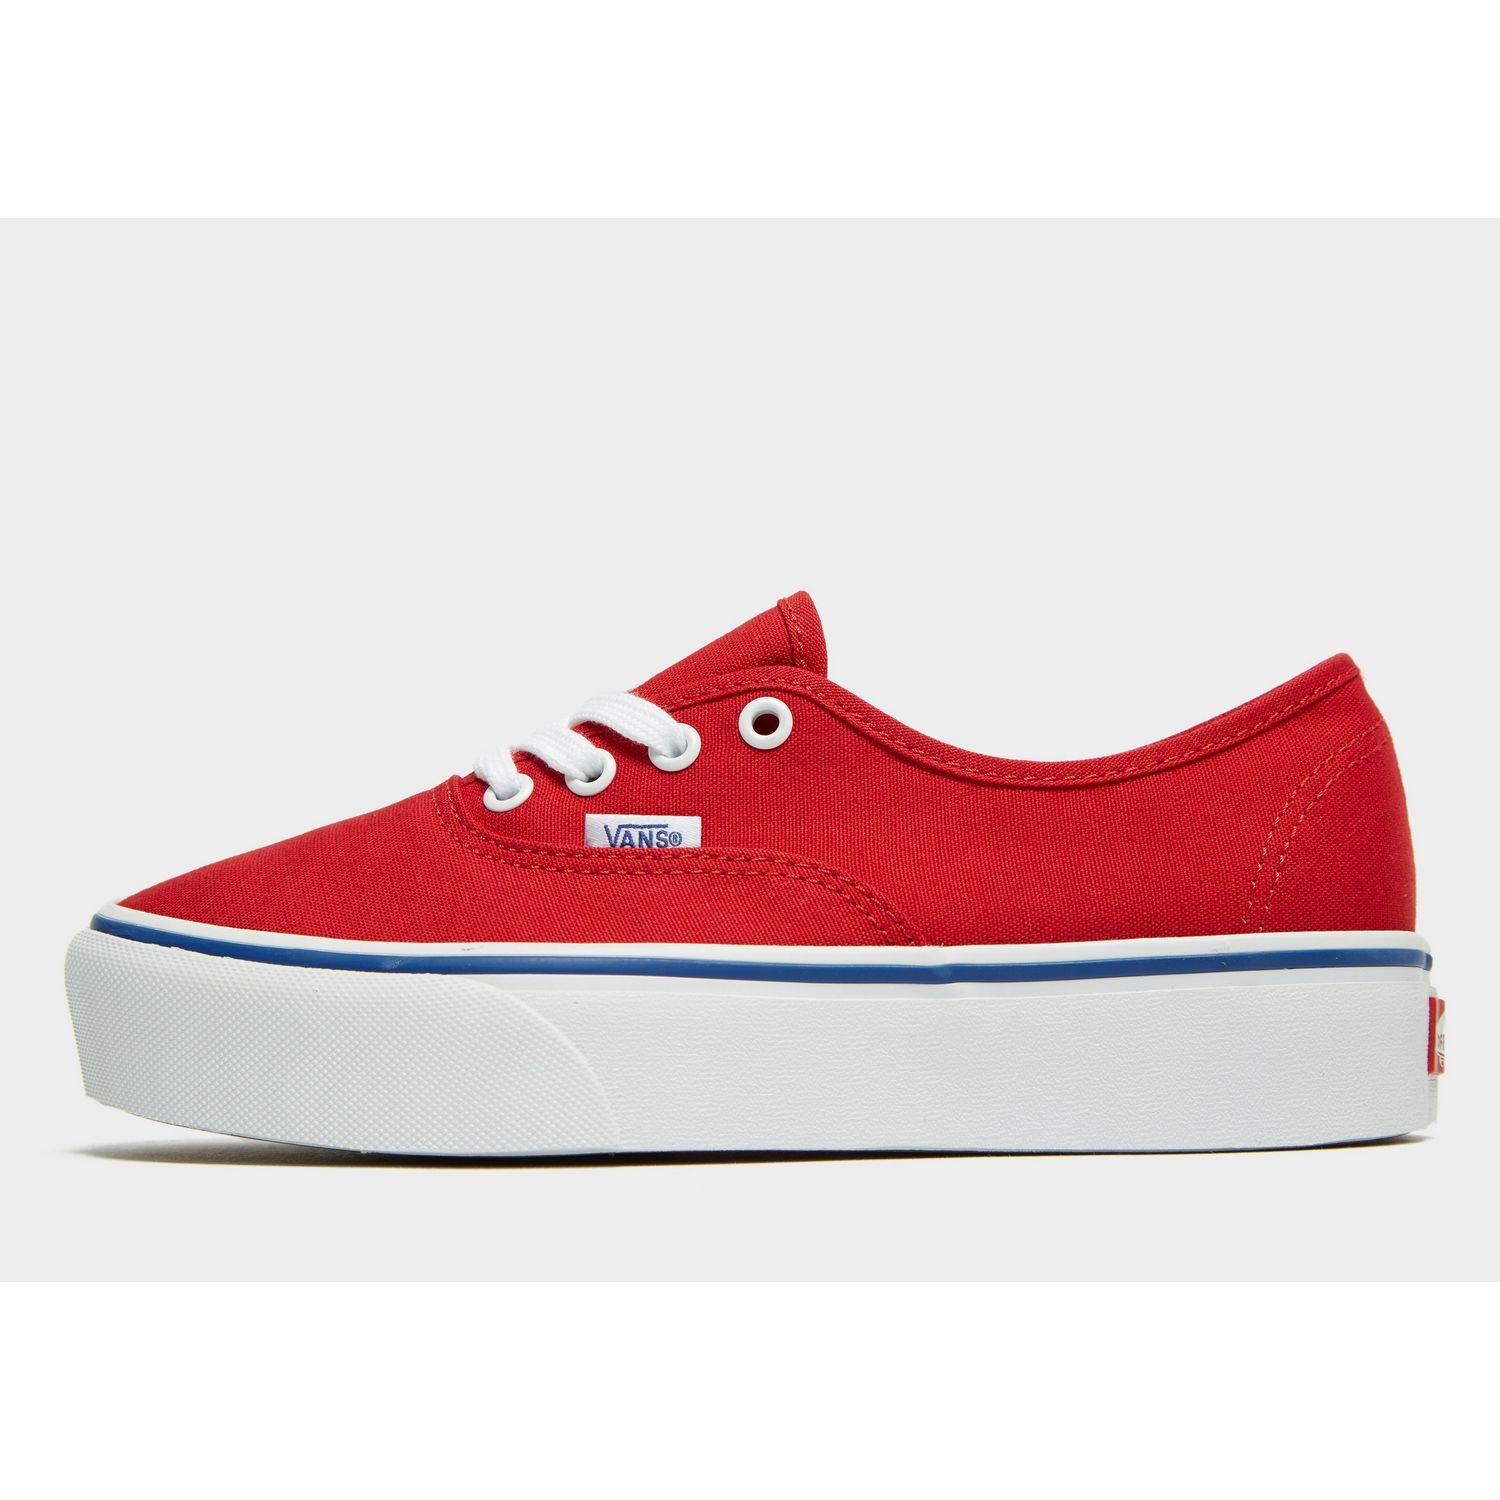 Vans Canvas Authentic Platform in Red/White (Red) - Lyst